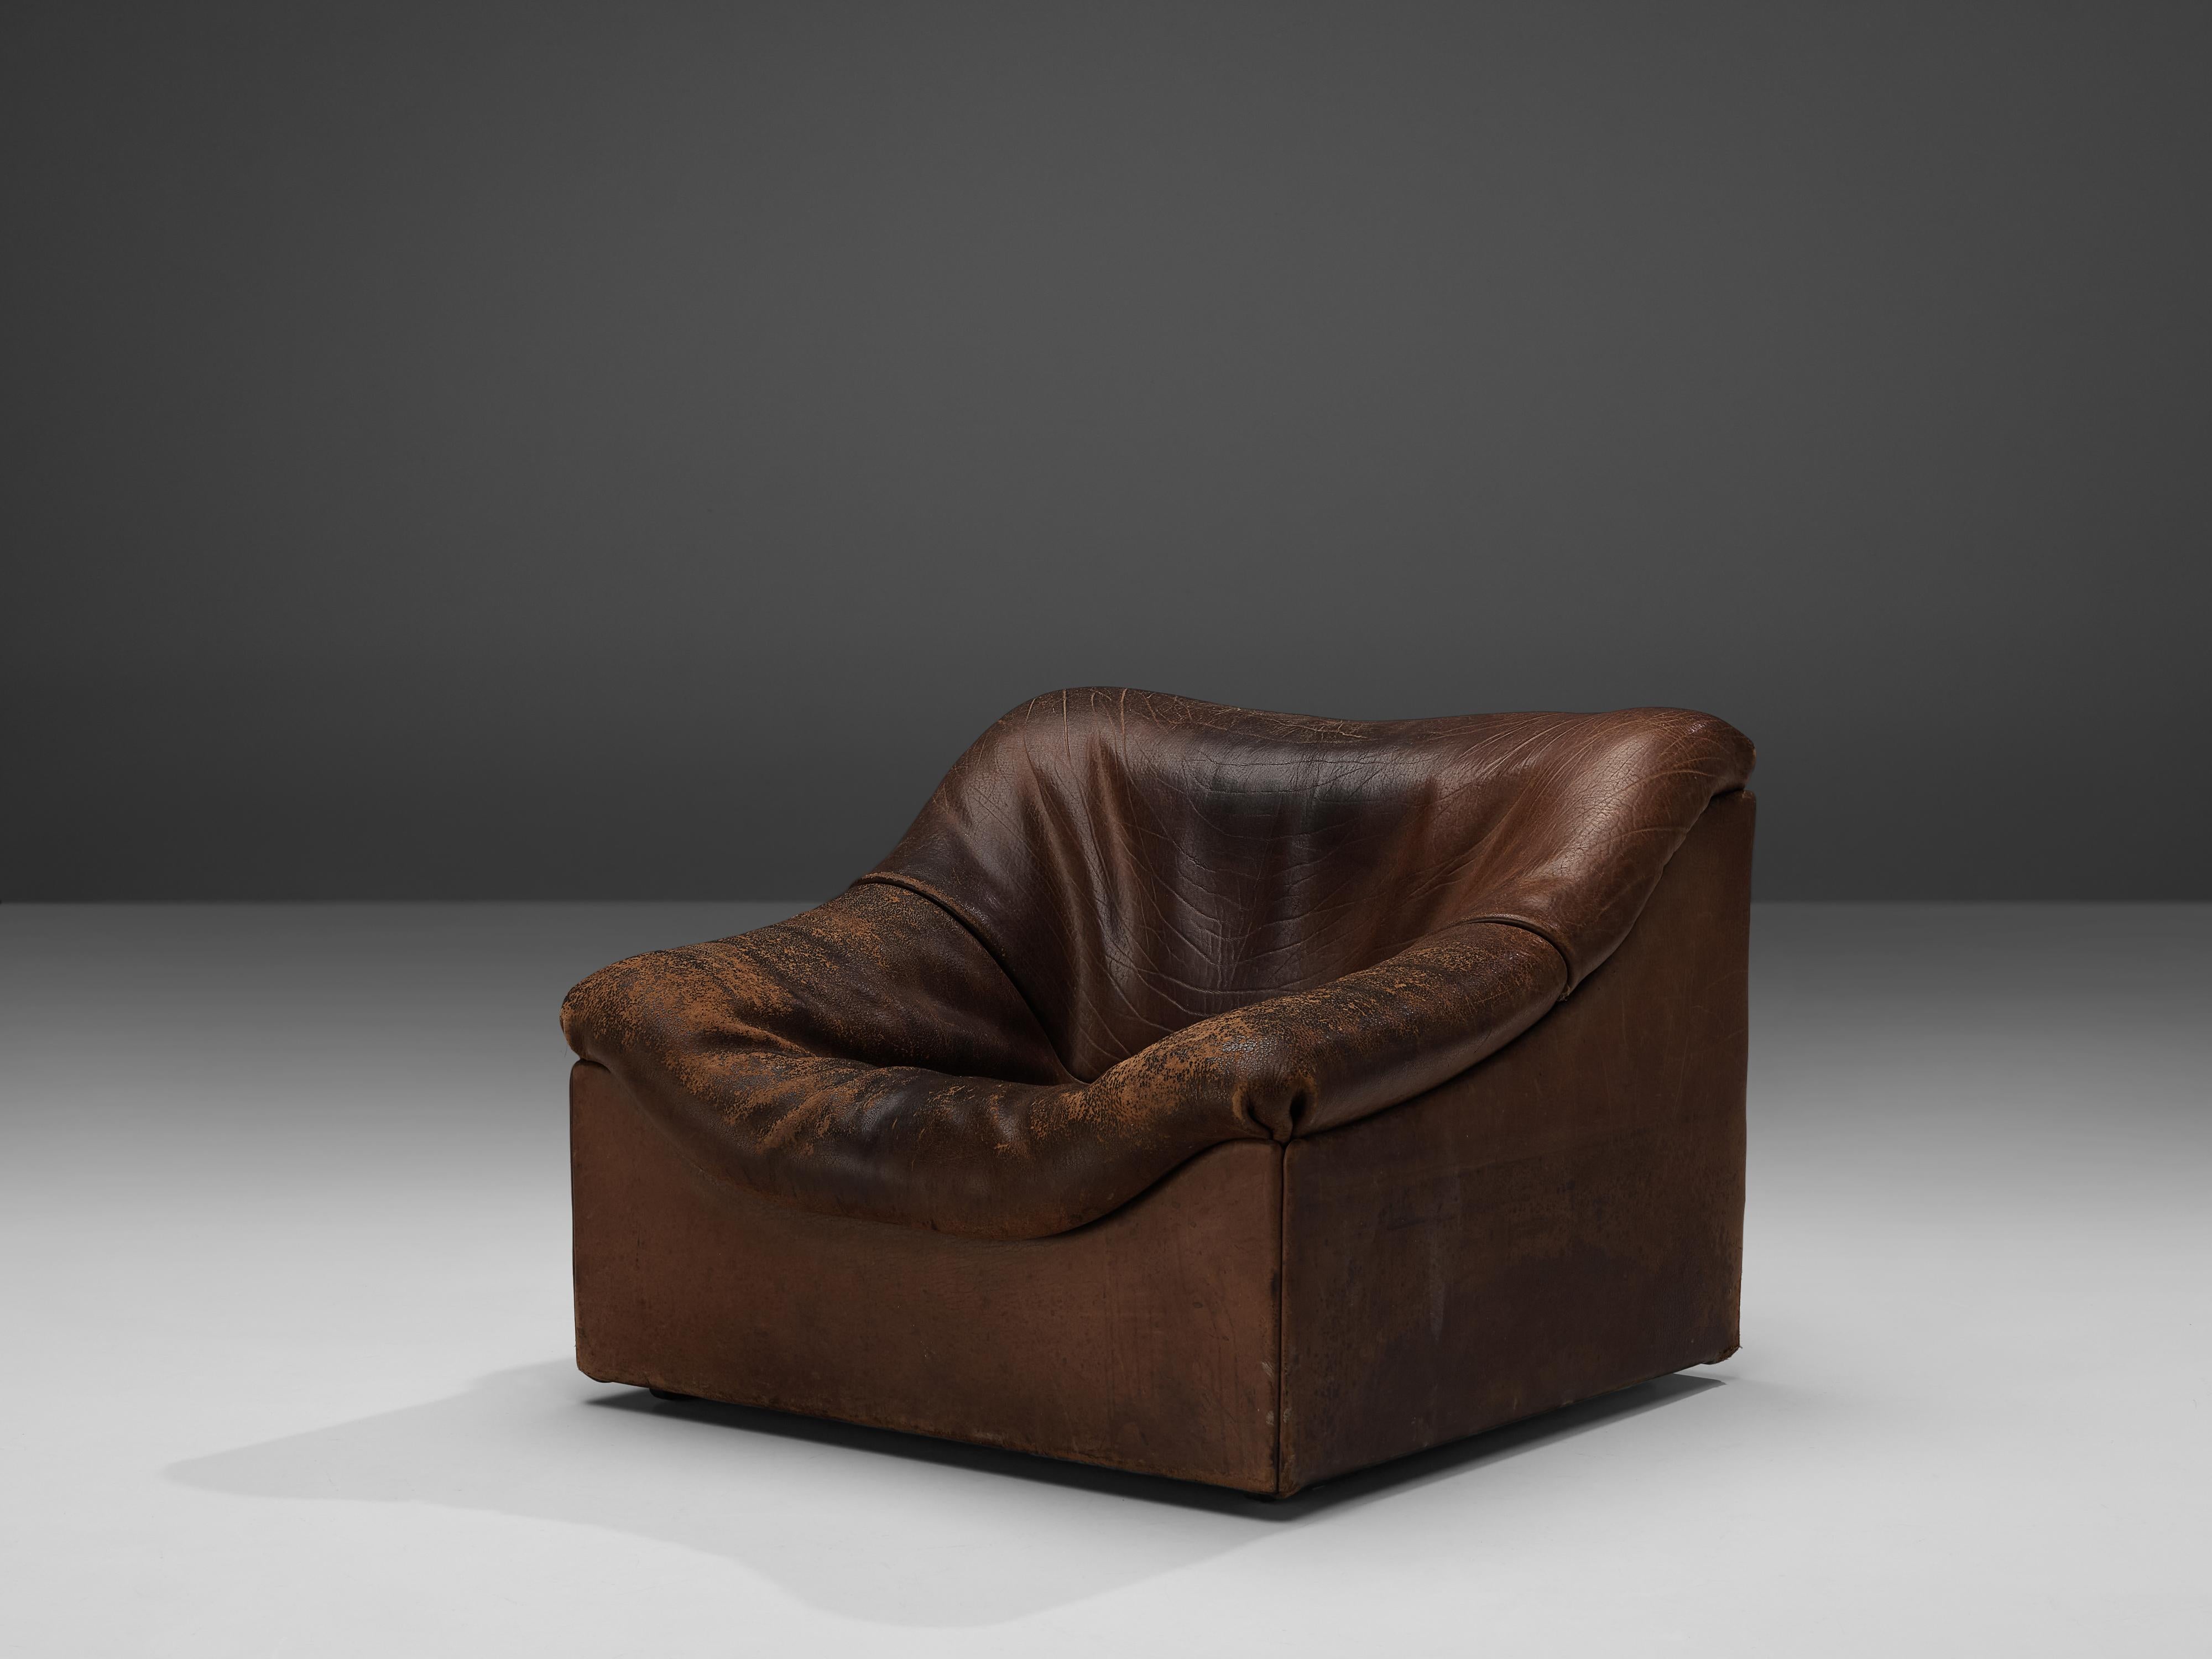 De Sede, DS46 lounge chair, brown leather, Switzerland, 1970s

Comfortable lounge chair in thick buffalo leather by DeSede. This model features a solid base with a rounded, bulky seat and a high back. The piece is in original condition and the